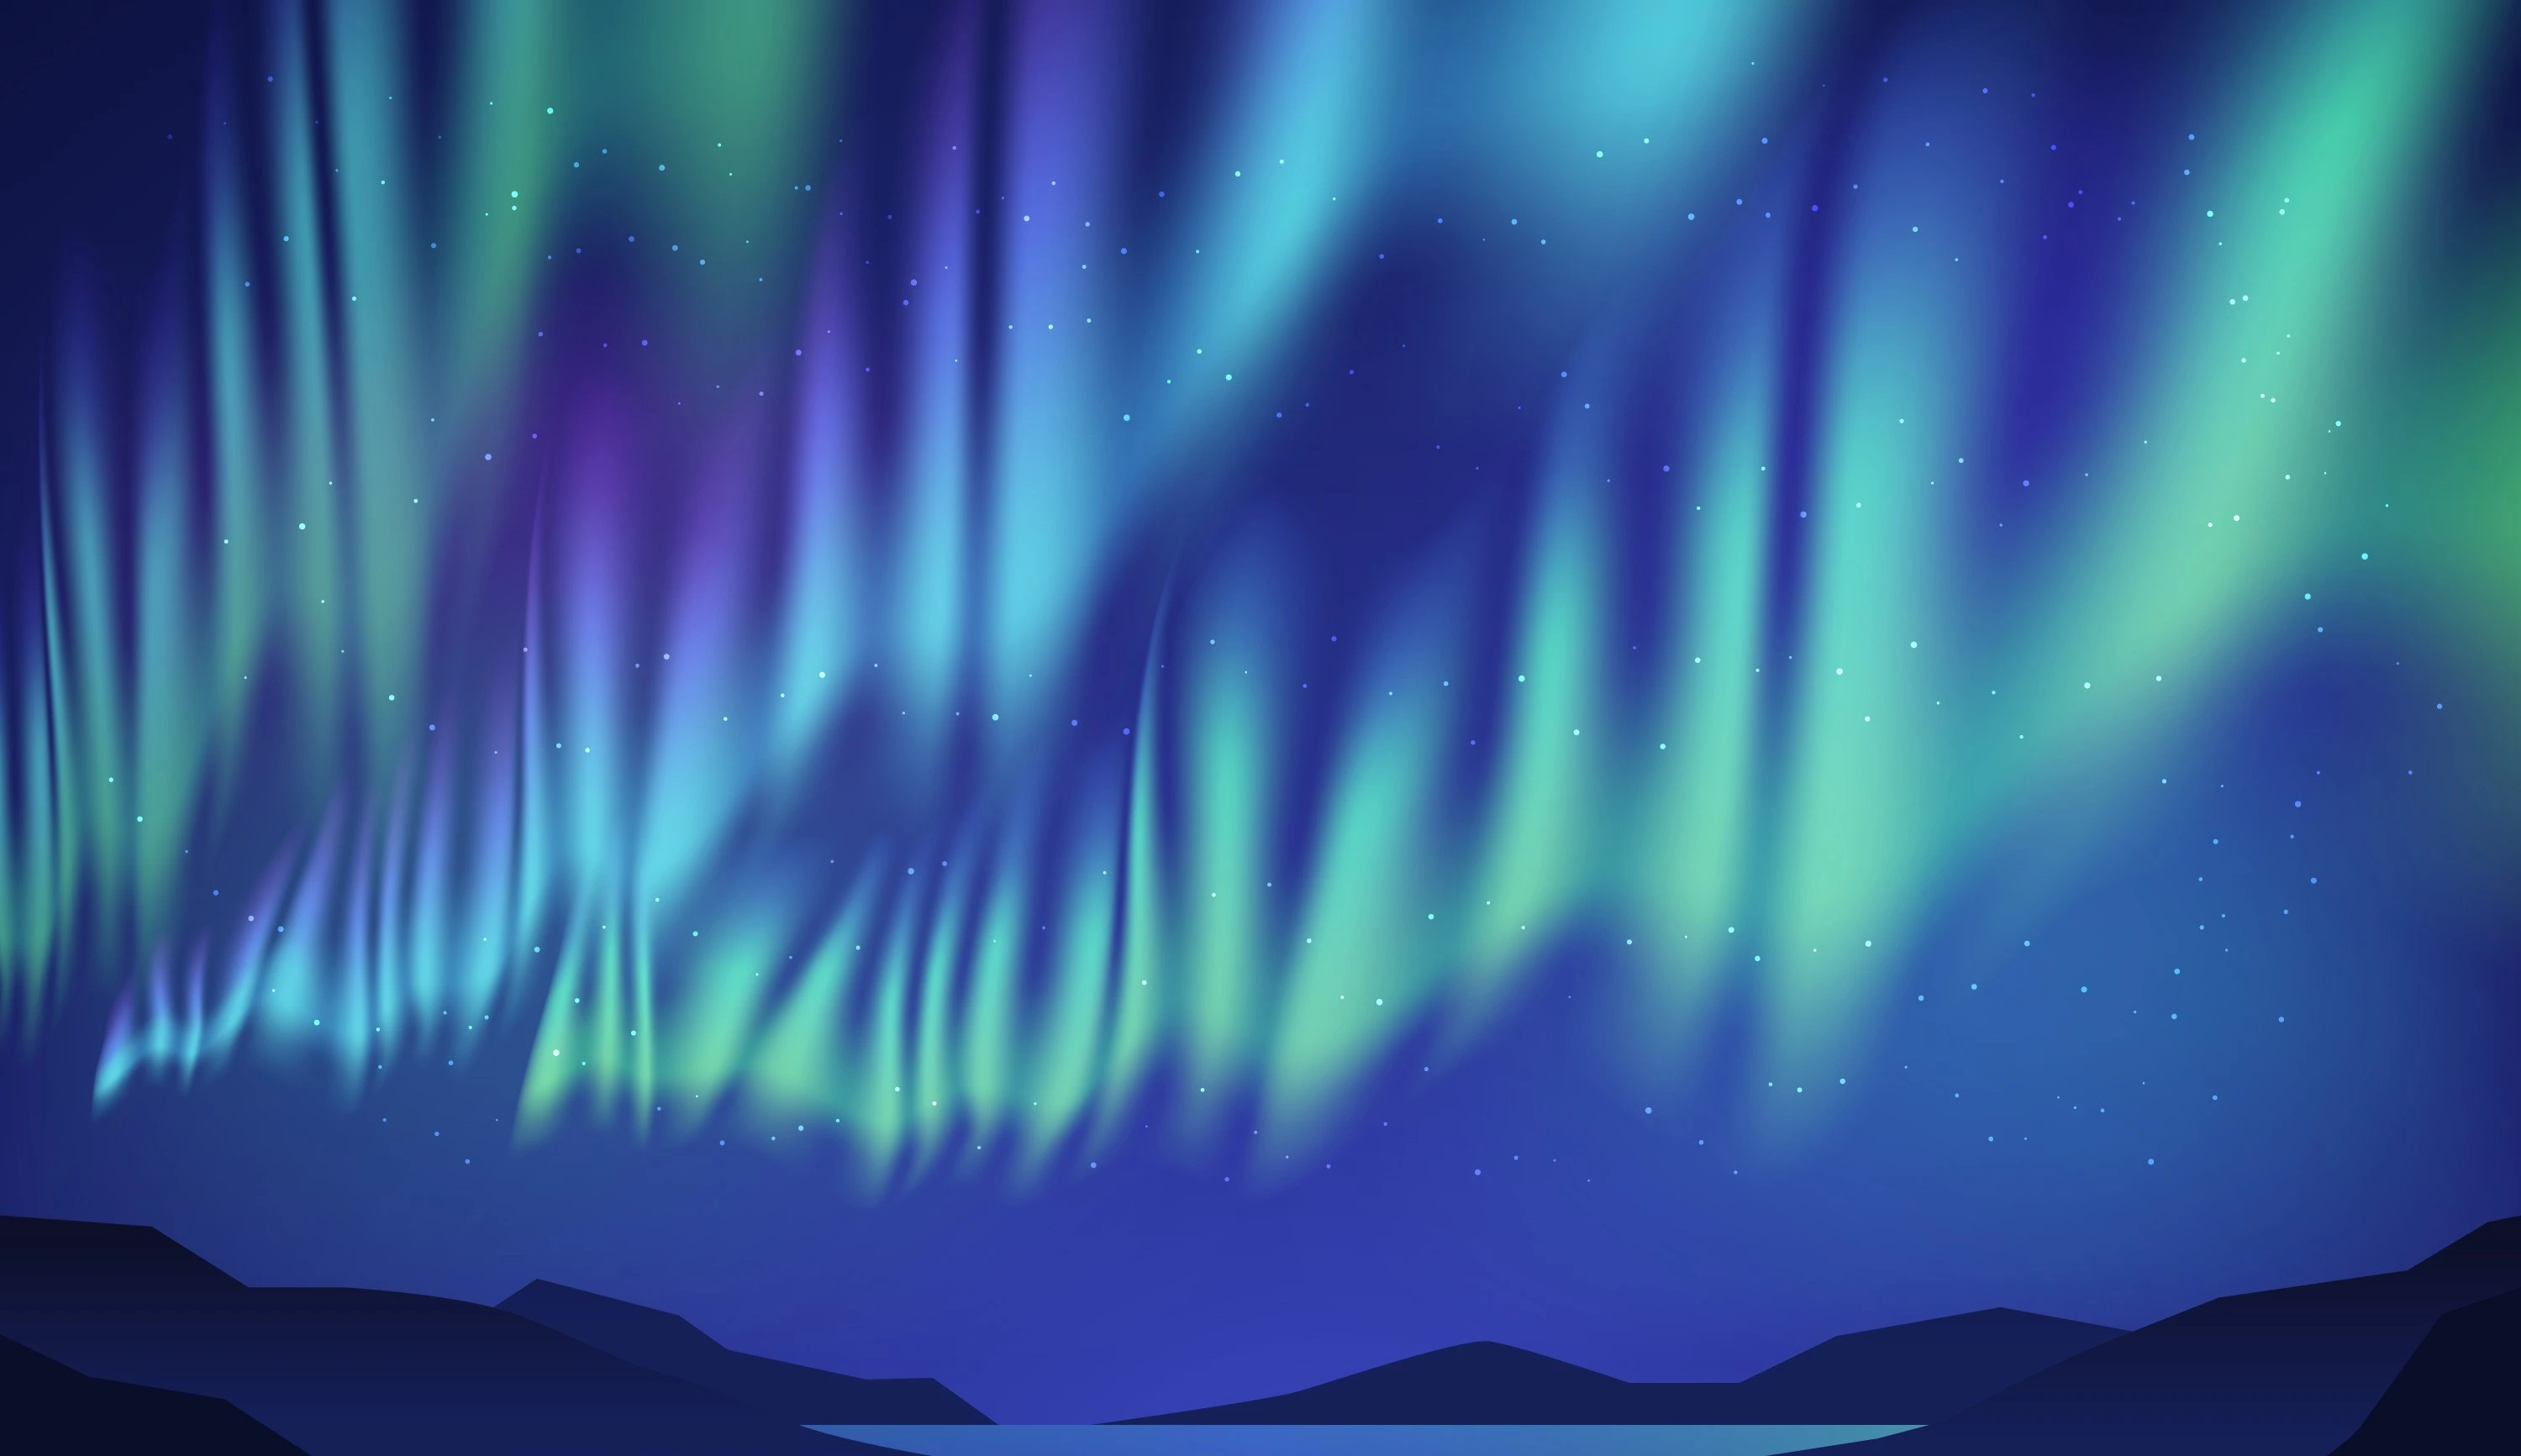 Are the Northern Lights the secret to cybersecurity?